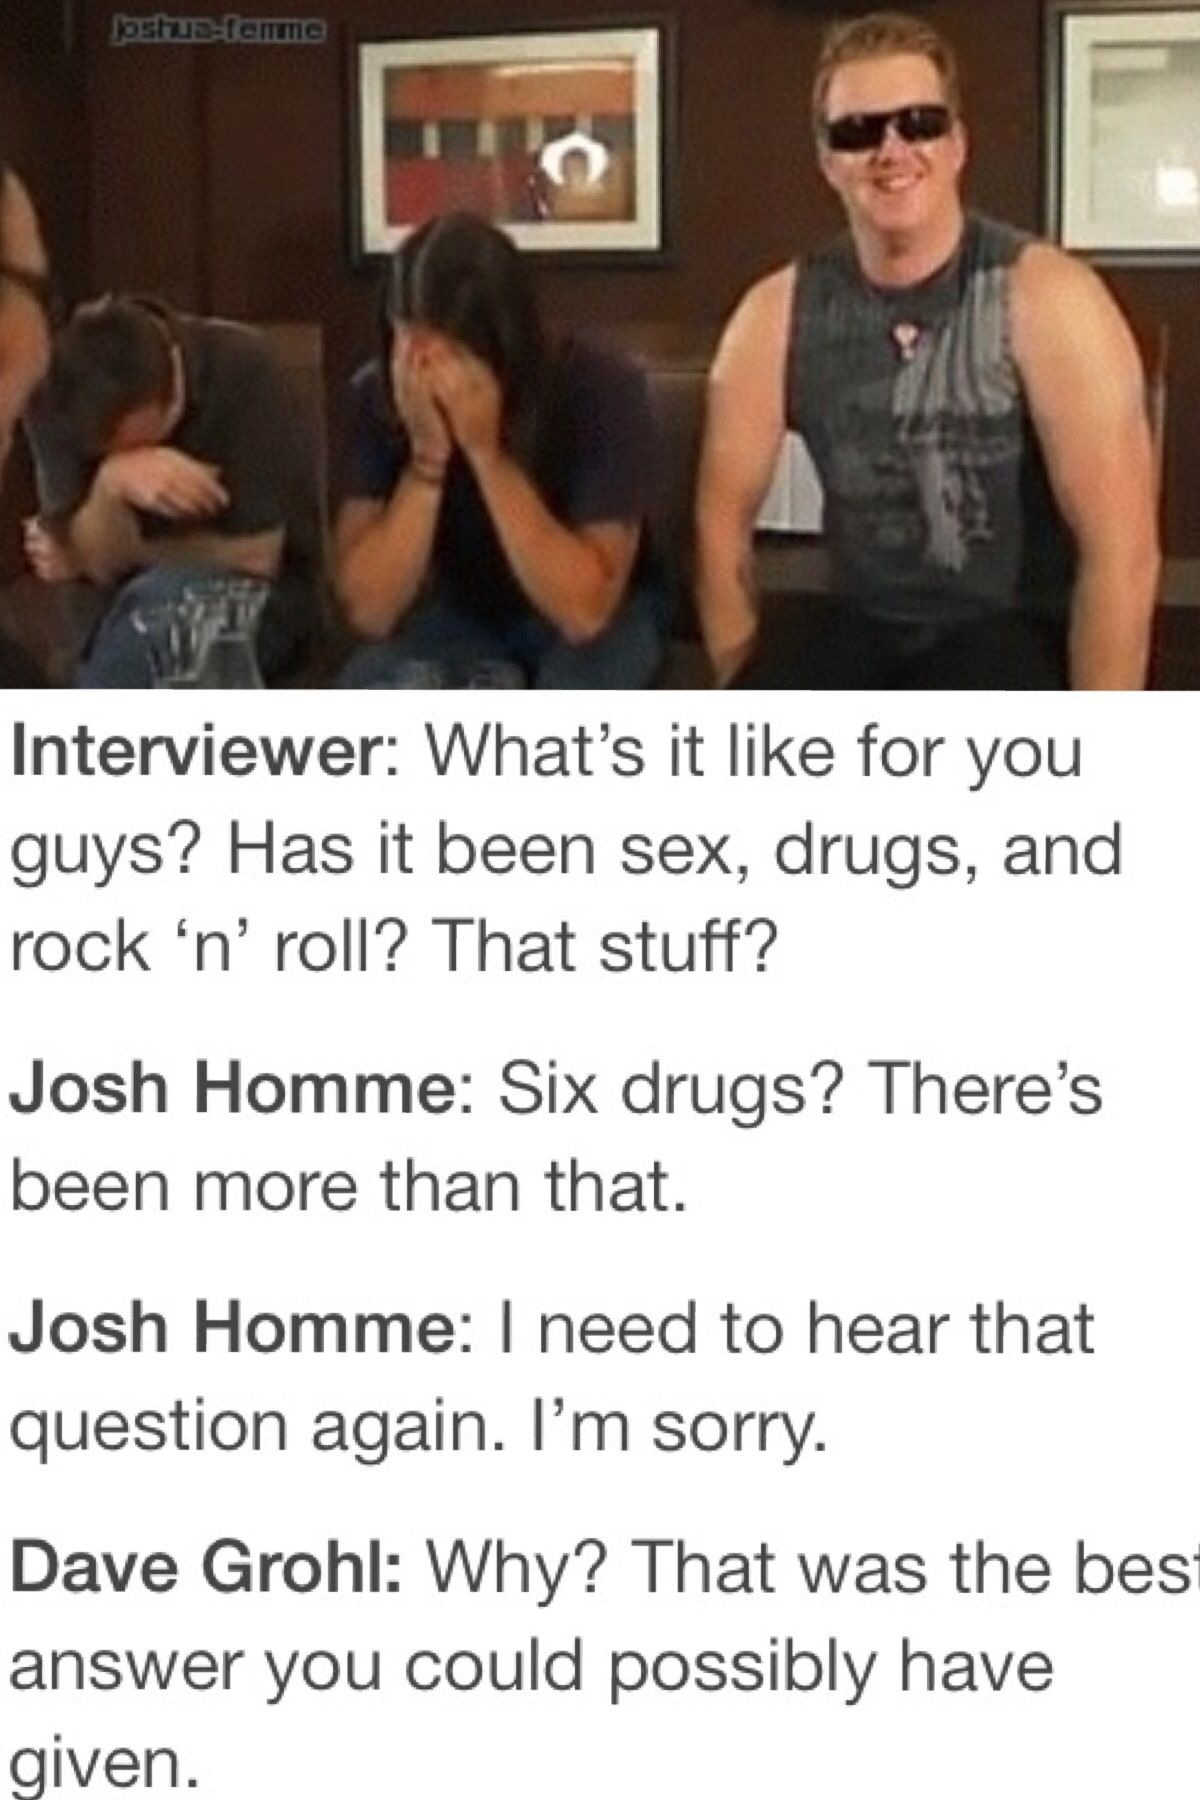 meme stream - nicotine valium vicodin marijuana ecstasy and alcohol - Jostefemme Interviewer What's it for you guys? Has it been sex, drugs, and rock 'n' roll? That stuff? Josh Homme Six drugs? There's been more than that. Josh Homme I need to hear that q